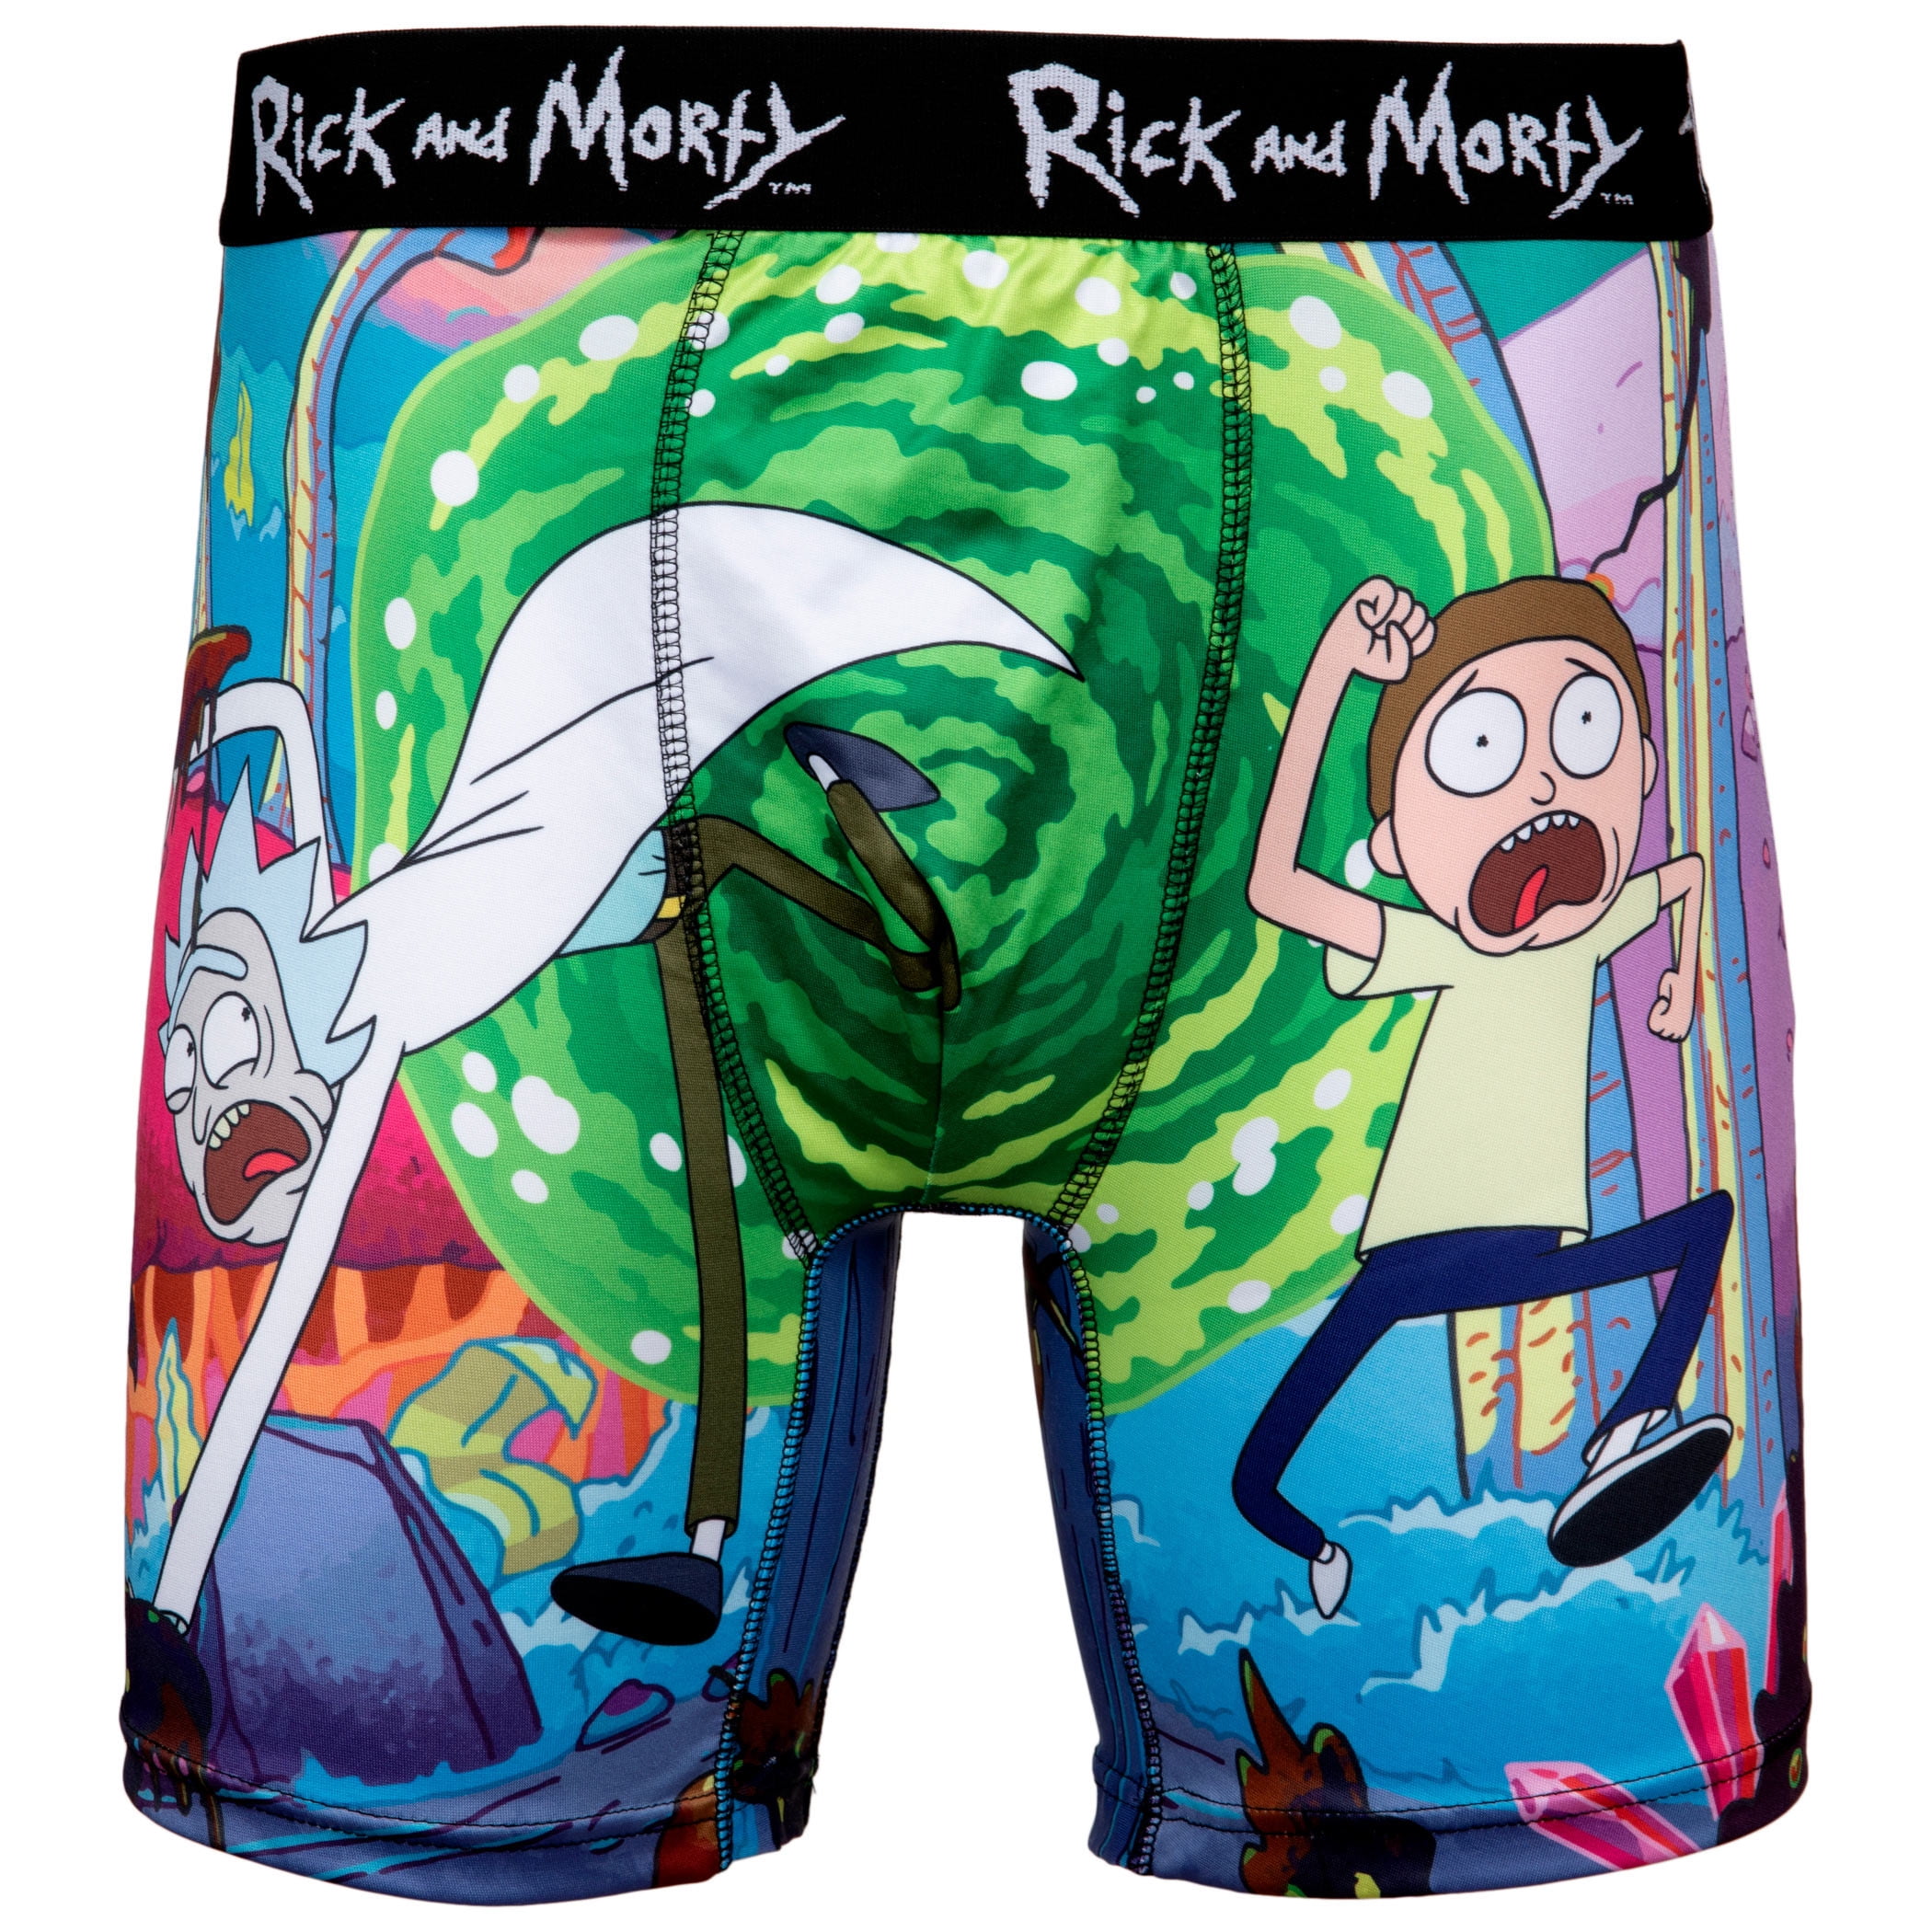 Rick and Morty Chased Out Of Portal Boxer Briefs-Medium (32-34)